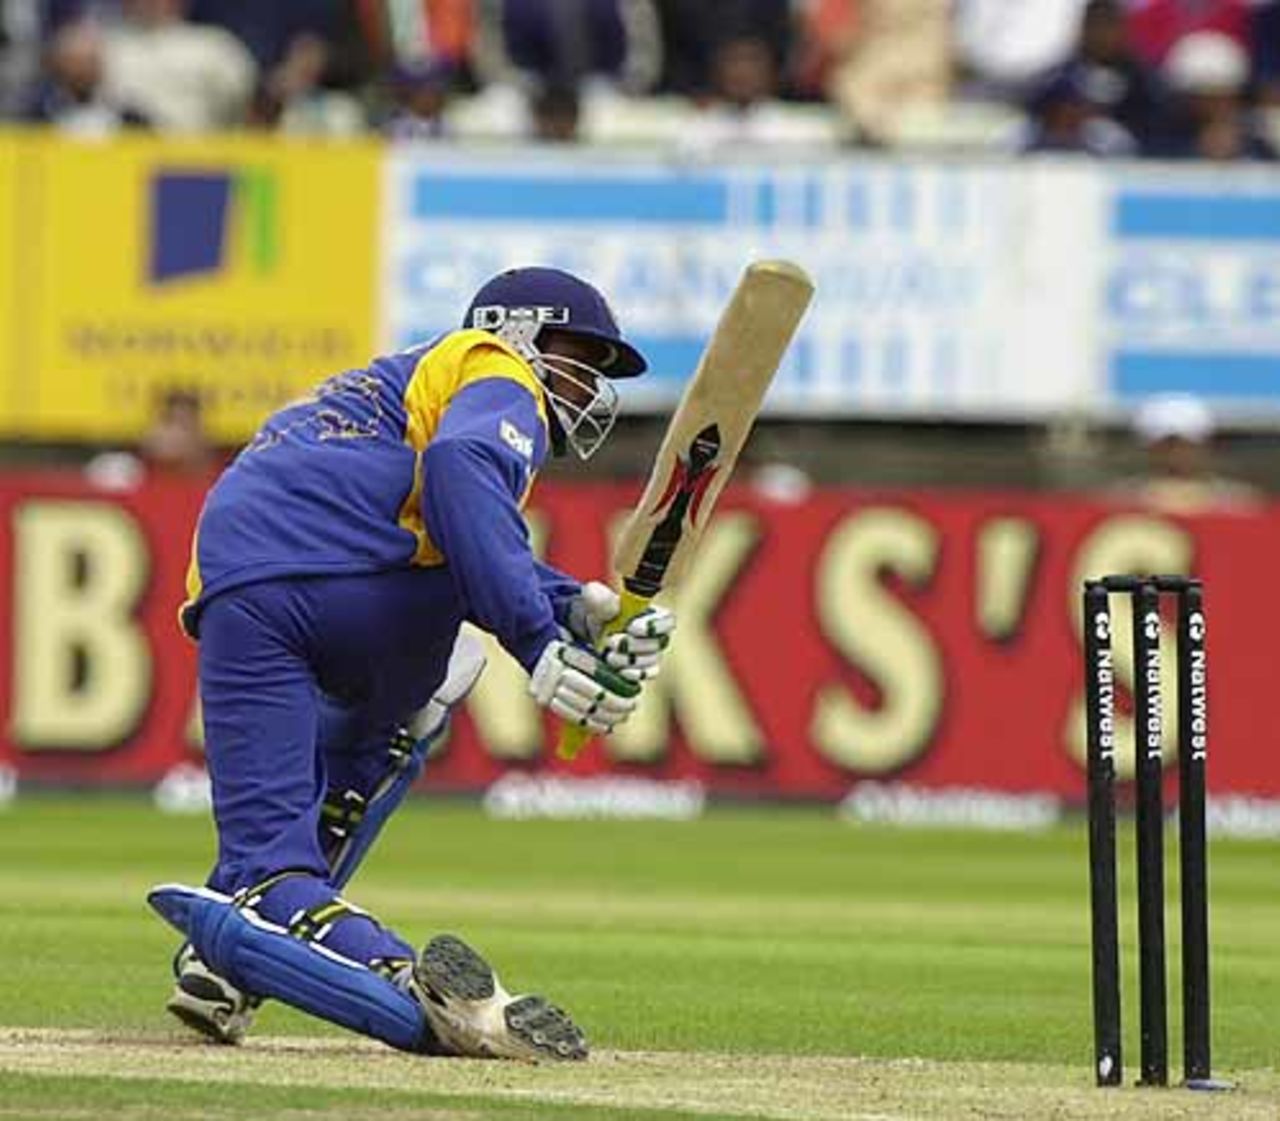 Russel Arnold in a bit of a tangle with The Wand bat, India v Sri Lanka at Birmingham, July 2002